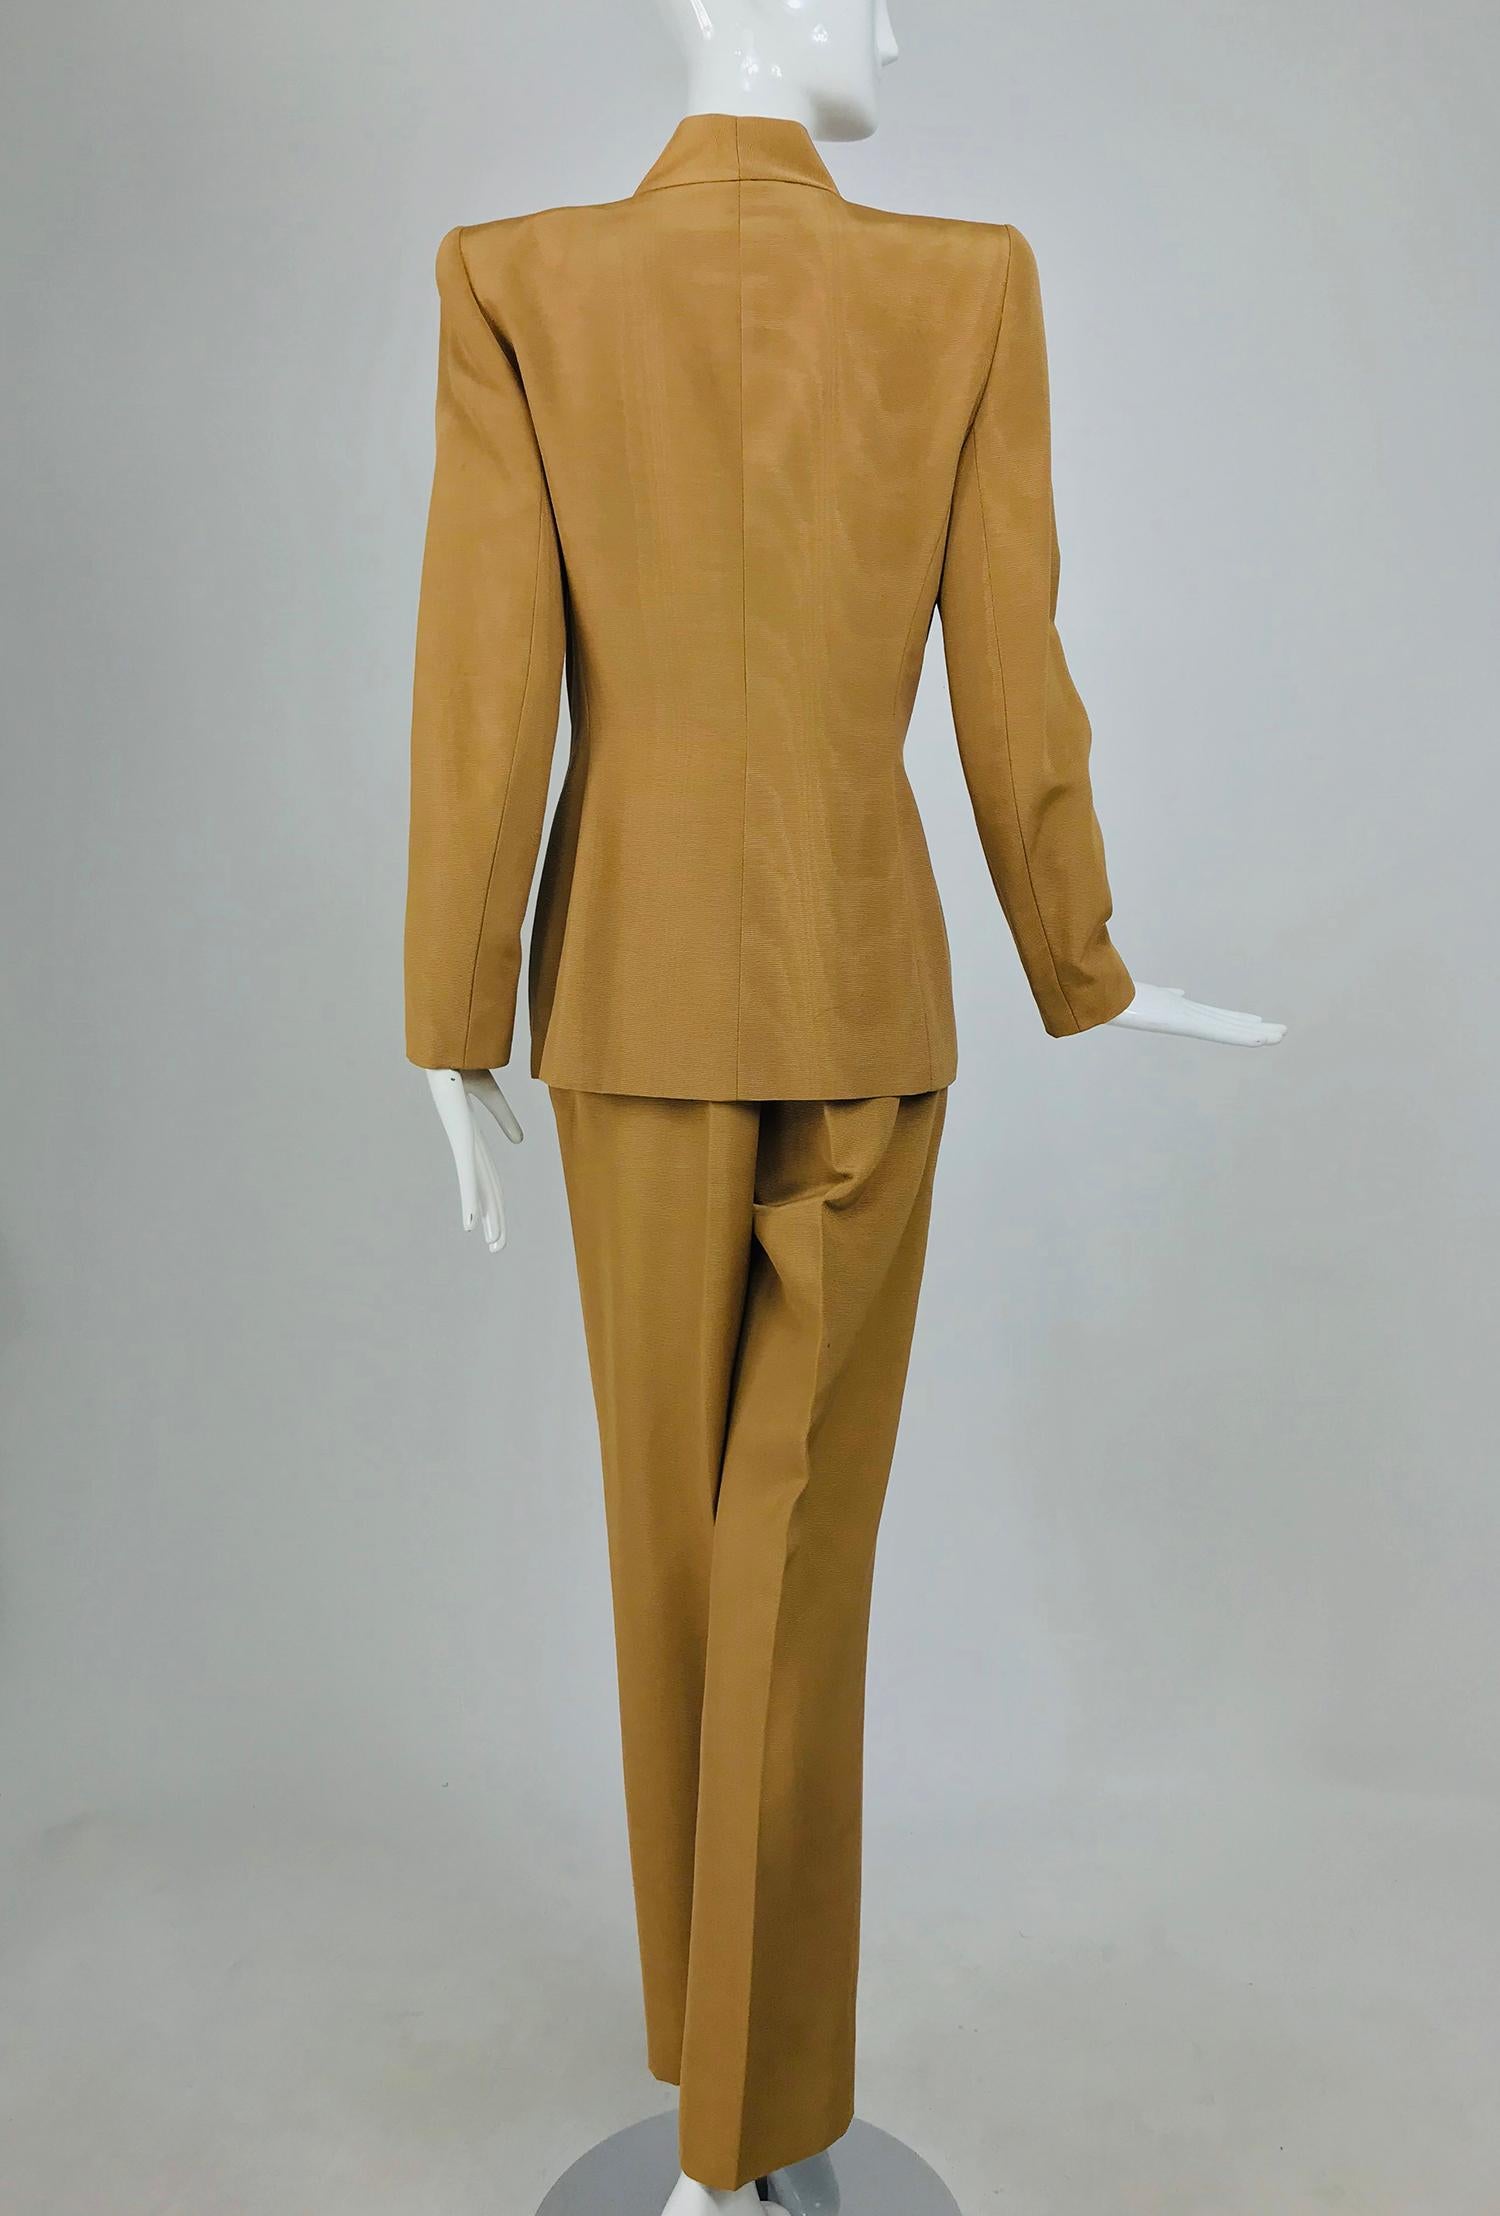 Givenchy Couture Gold Silk Ottoman Trouser Suit 1990s 2